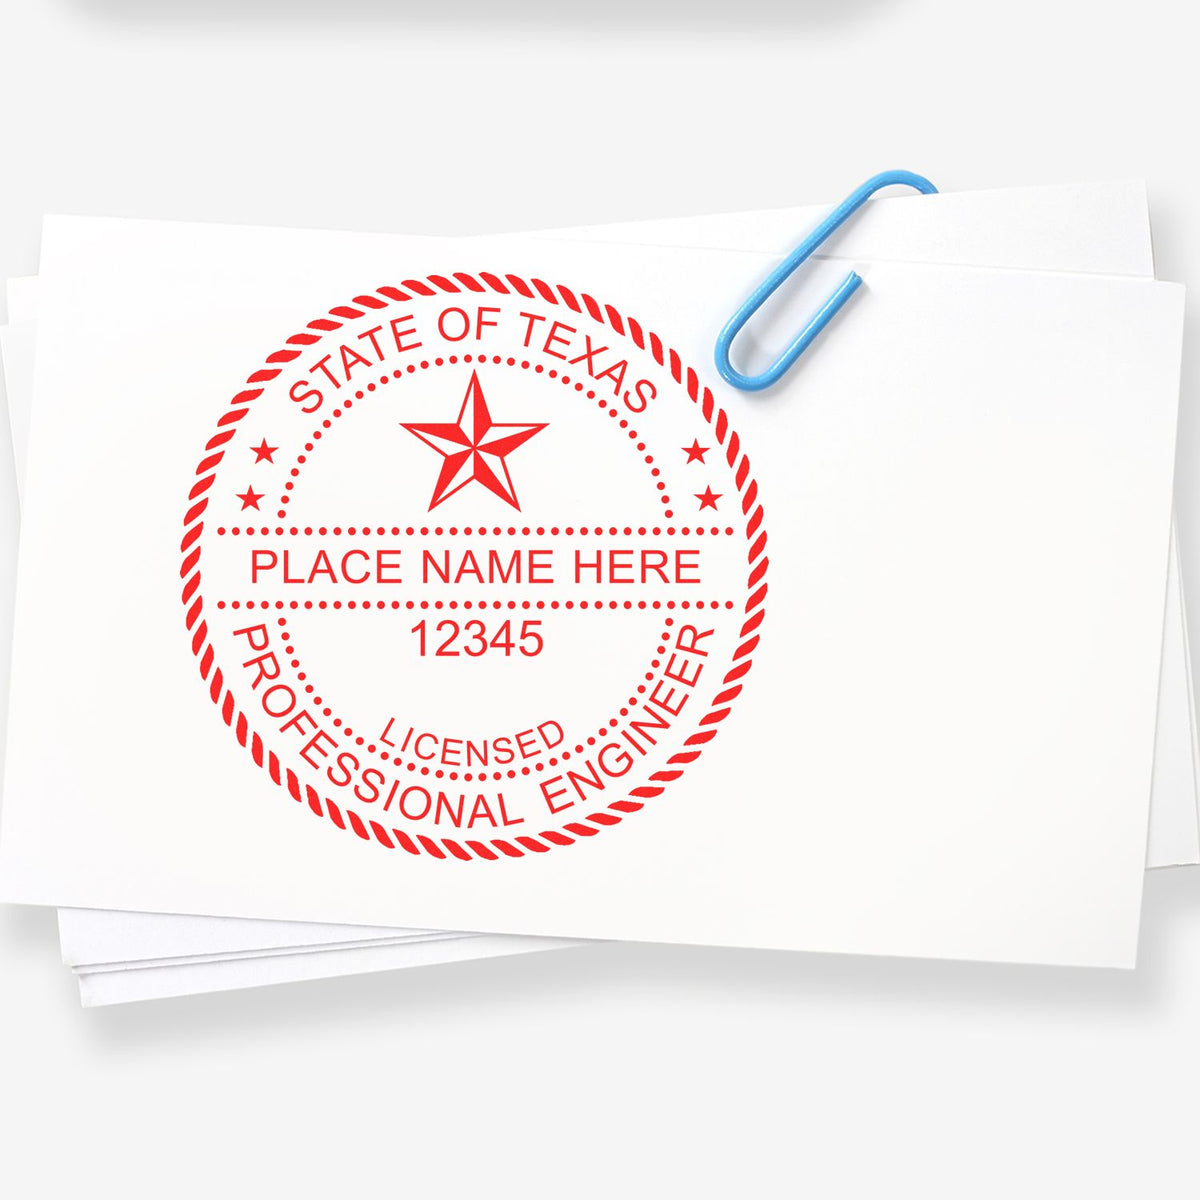 A lifestyle photo showing a stamped image of the Texas Professional Engineer Seal Stamp on a piece of paper